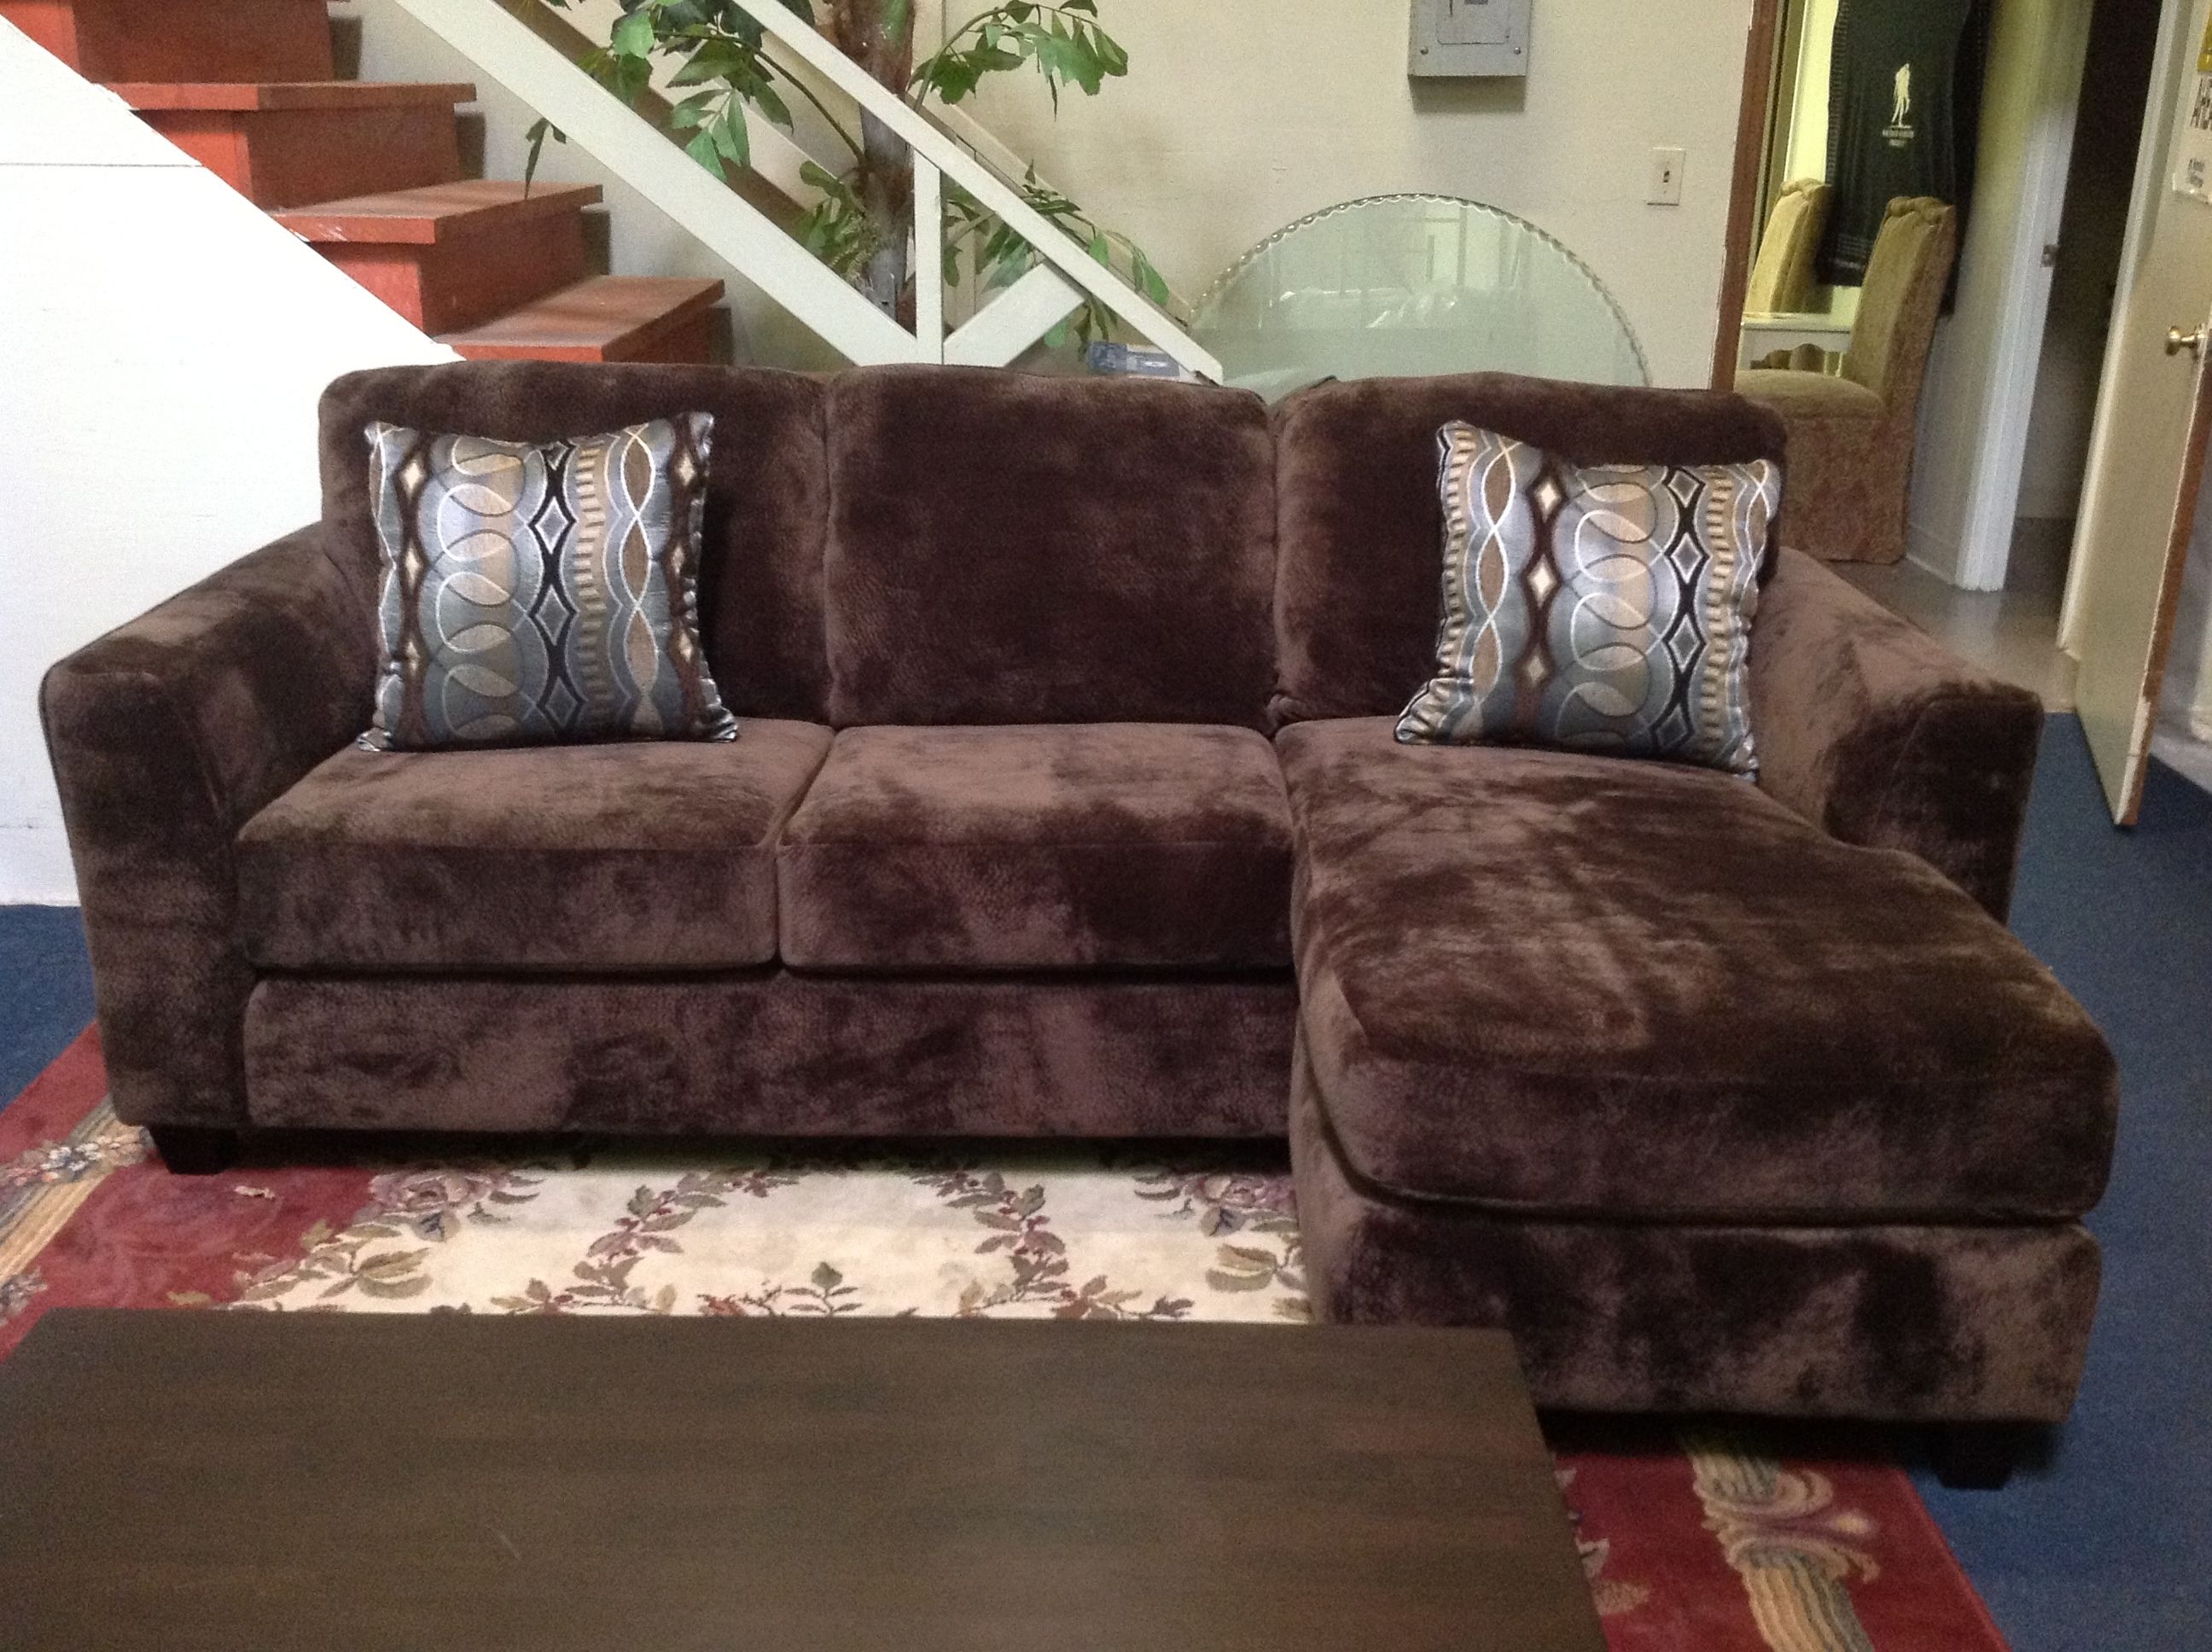 Modern Chesterfield Sofa Distressed Table Ashley Benton Blu Dot Throughout Benton 4 Piece Sectionals (View 22 of 30)